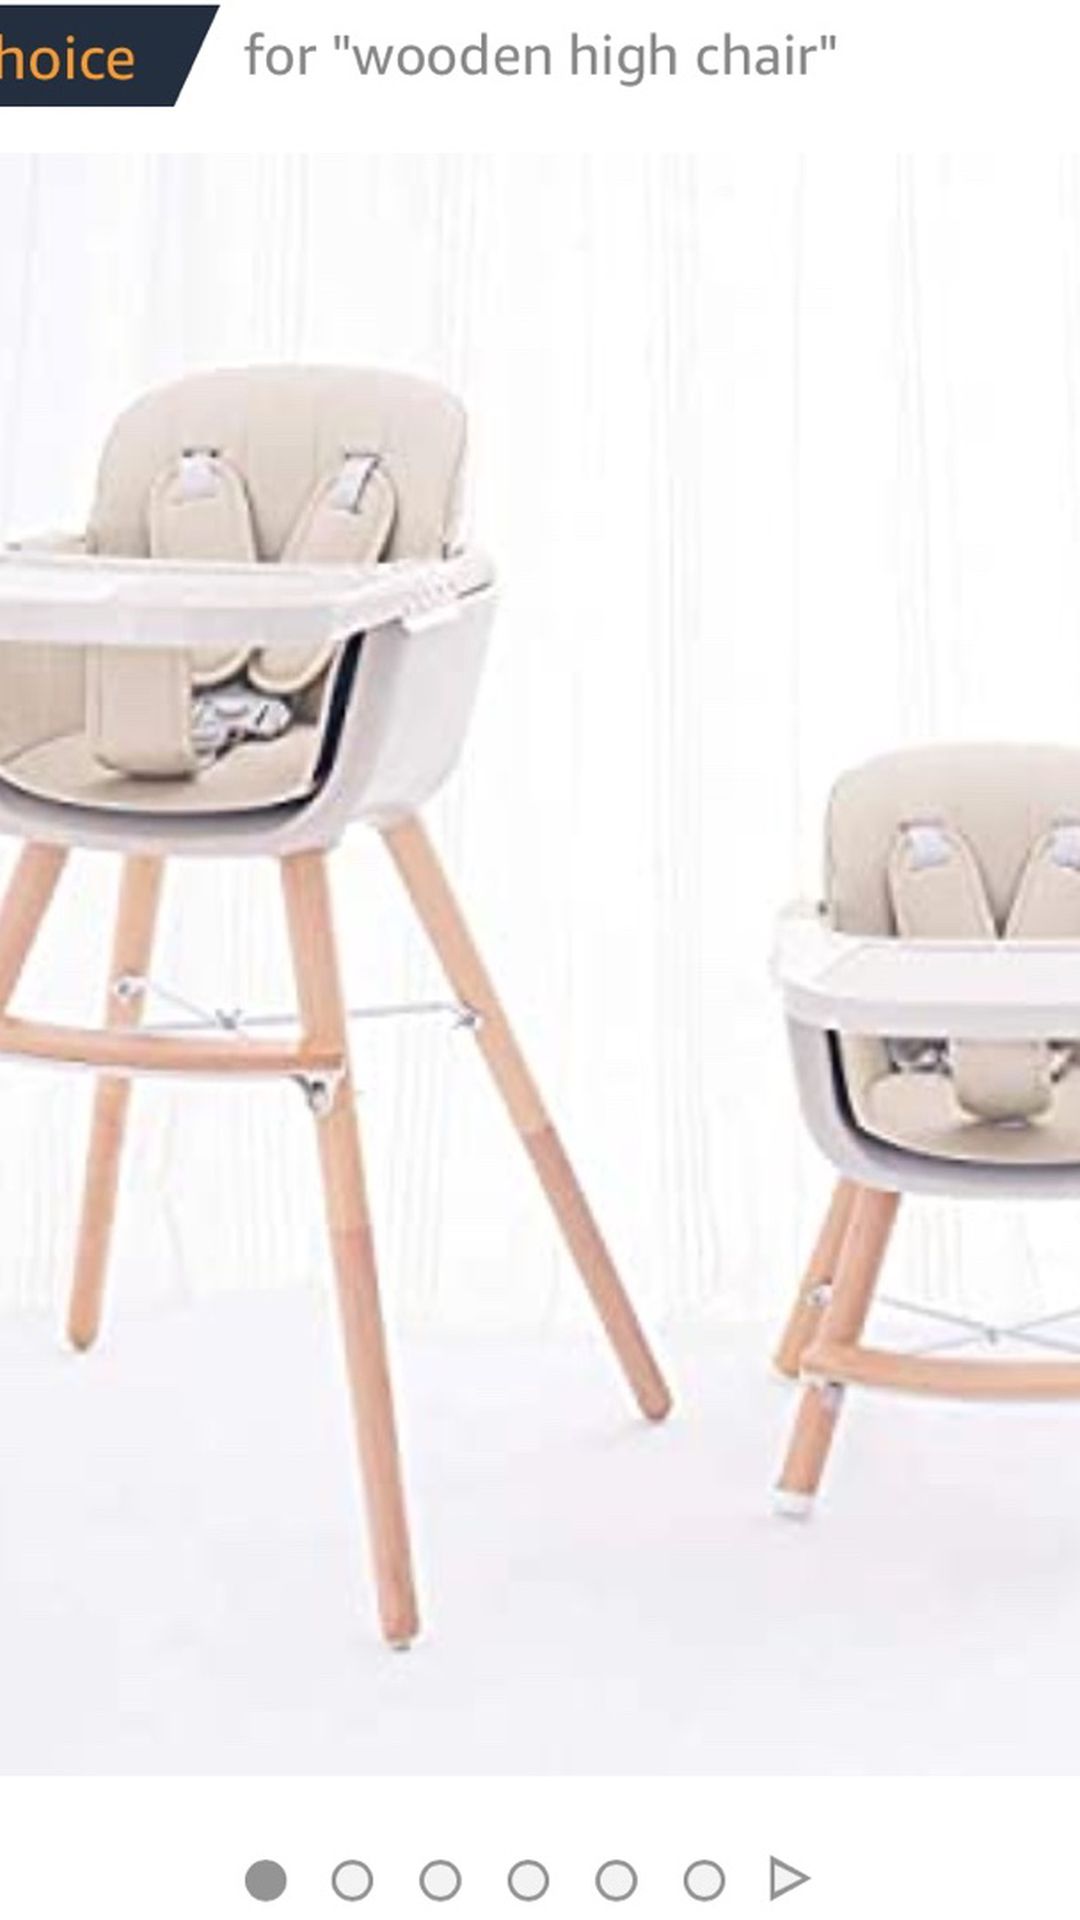 FUNNY SUPPLY 3-in-1 Convertible Wooden High Chair with Removable Tray and Adjustable Legs and Cushion - Cream Color